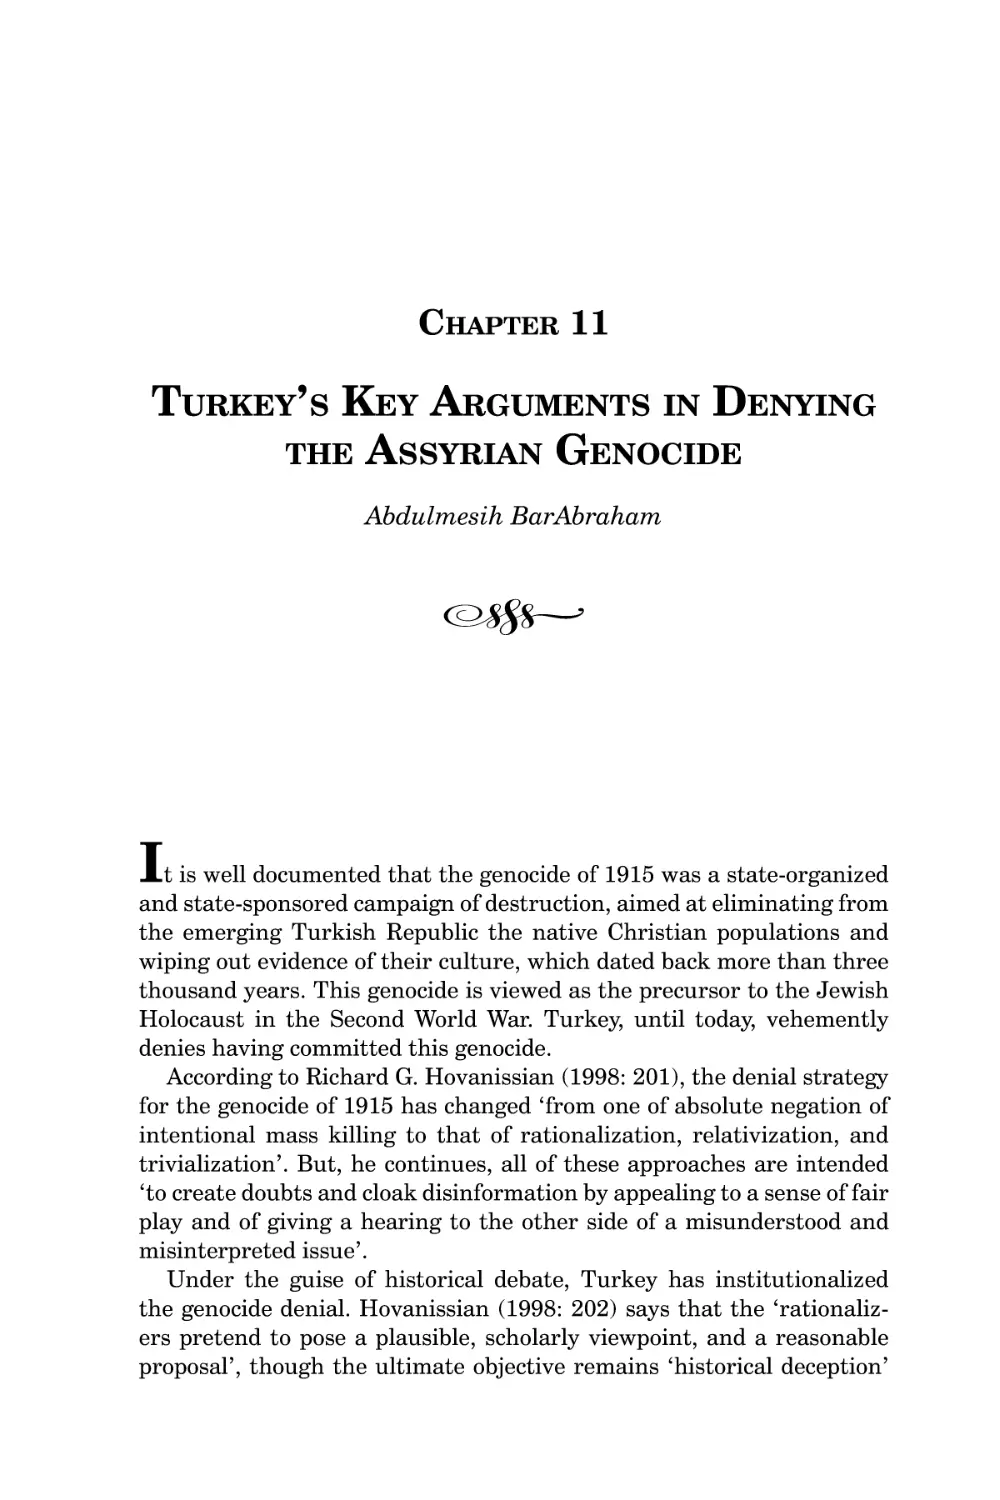 Chapter 11 Turkey’s Key Arguments in Denying the Assyrian Genocide